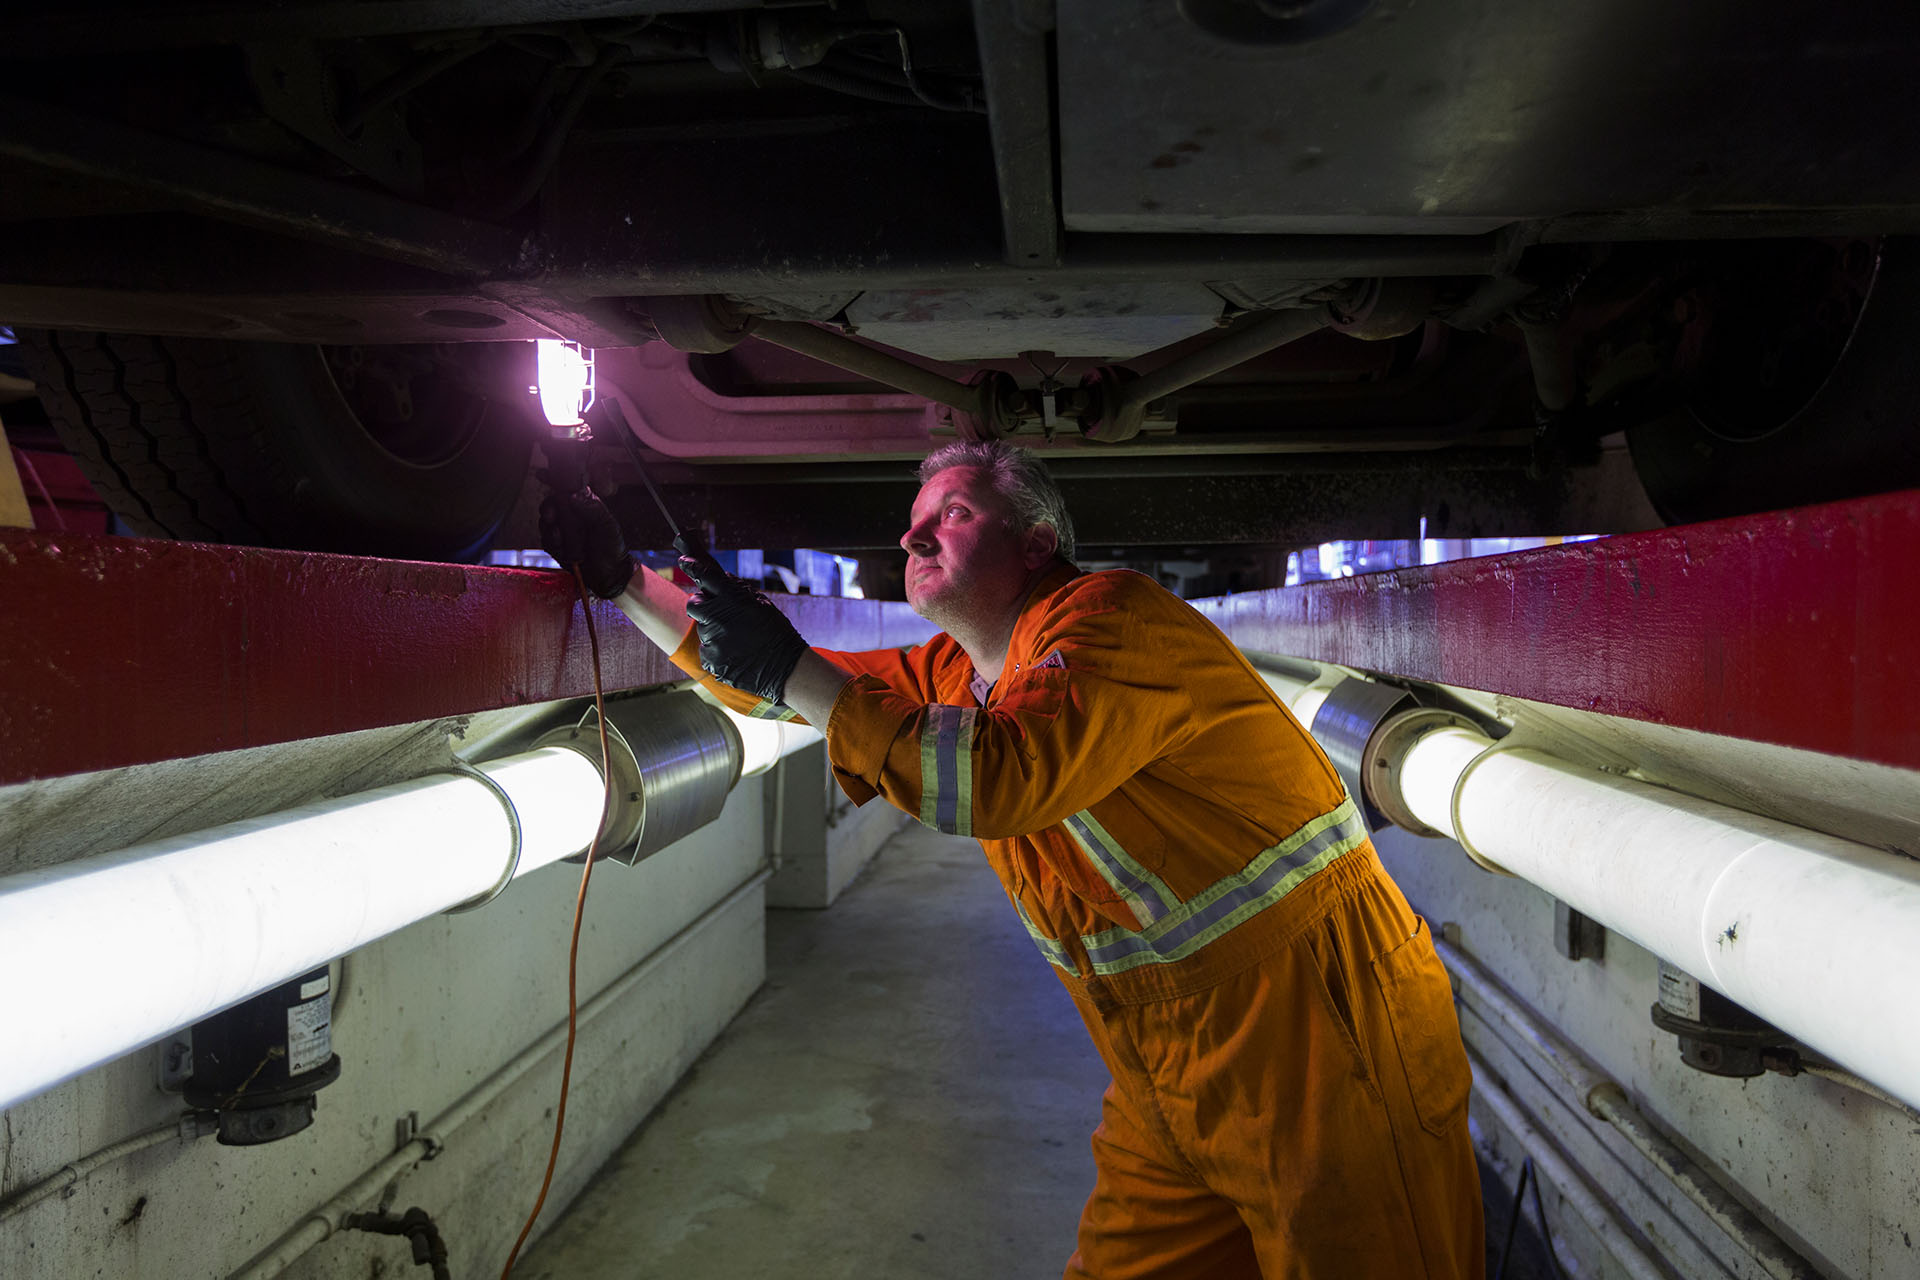 A mechanic examines underneath a bus with a light